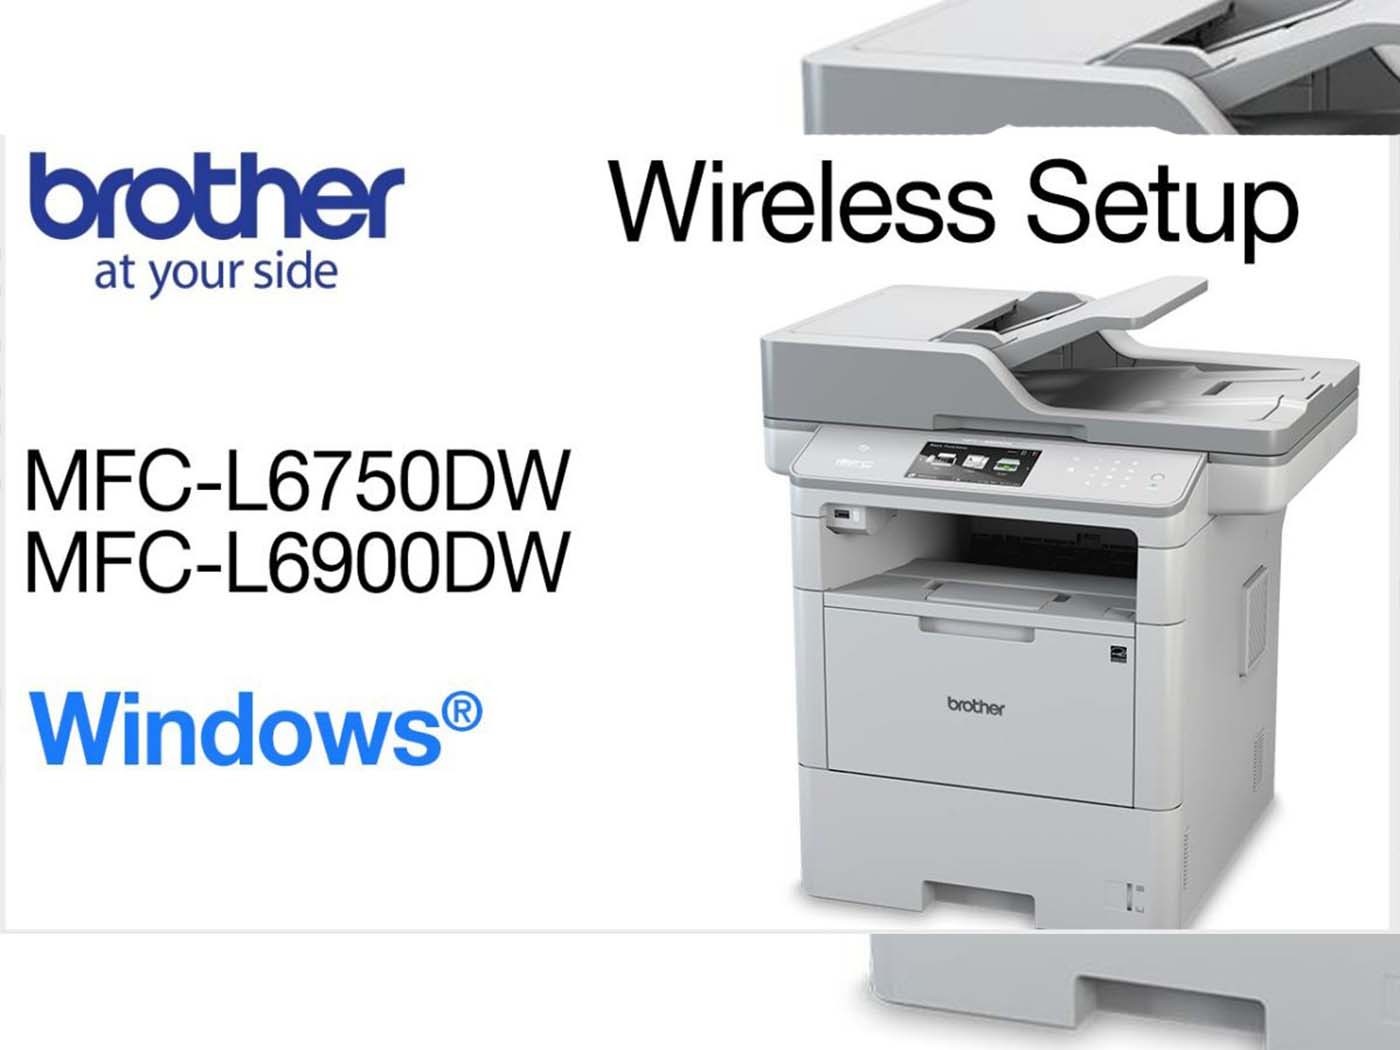 Review of the BROTHER MFC L6900DW copier from Its Design to Special Features